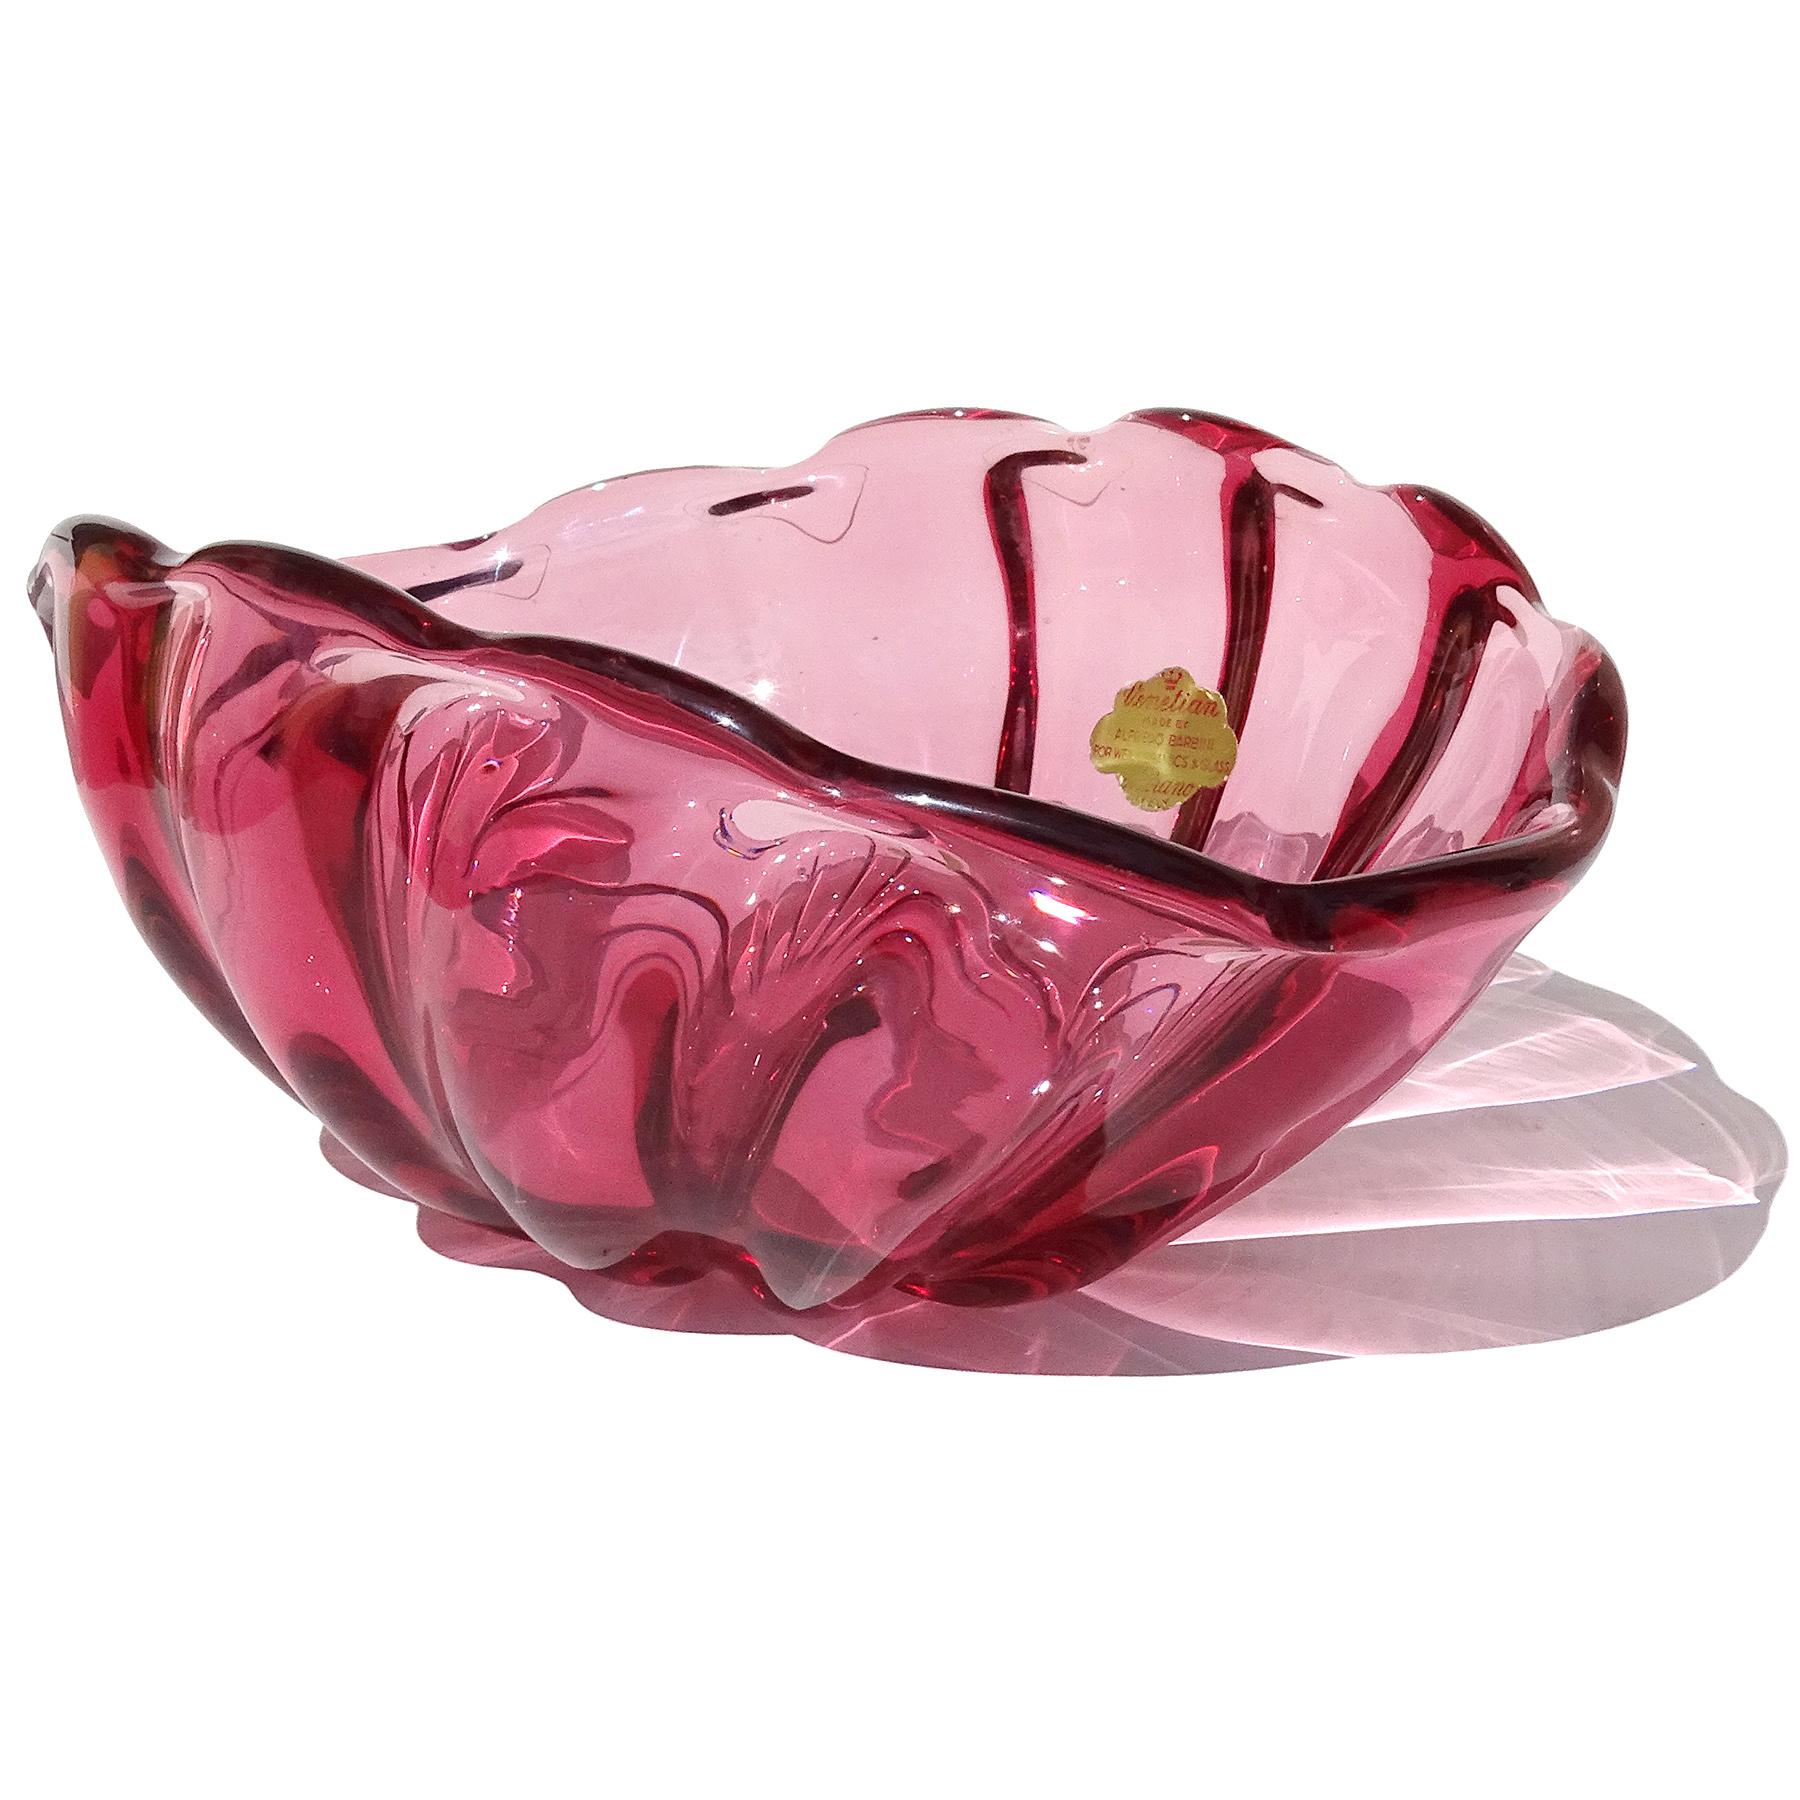 Beautiful vintage Murano hand blown Sommerso pink Italian art glass ribbed surface decorative bowl / ashtray. Documented to designer Alfredo Barbini, circa 1950-1960. Published in his catalog. The bowl has an original 